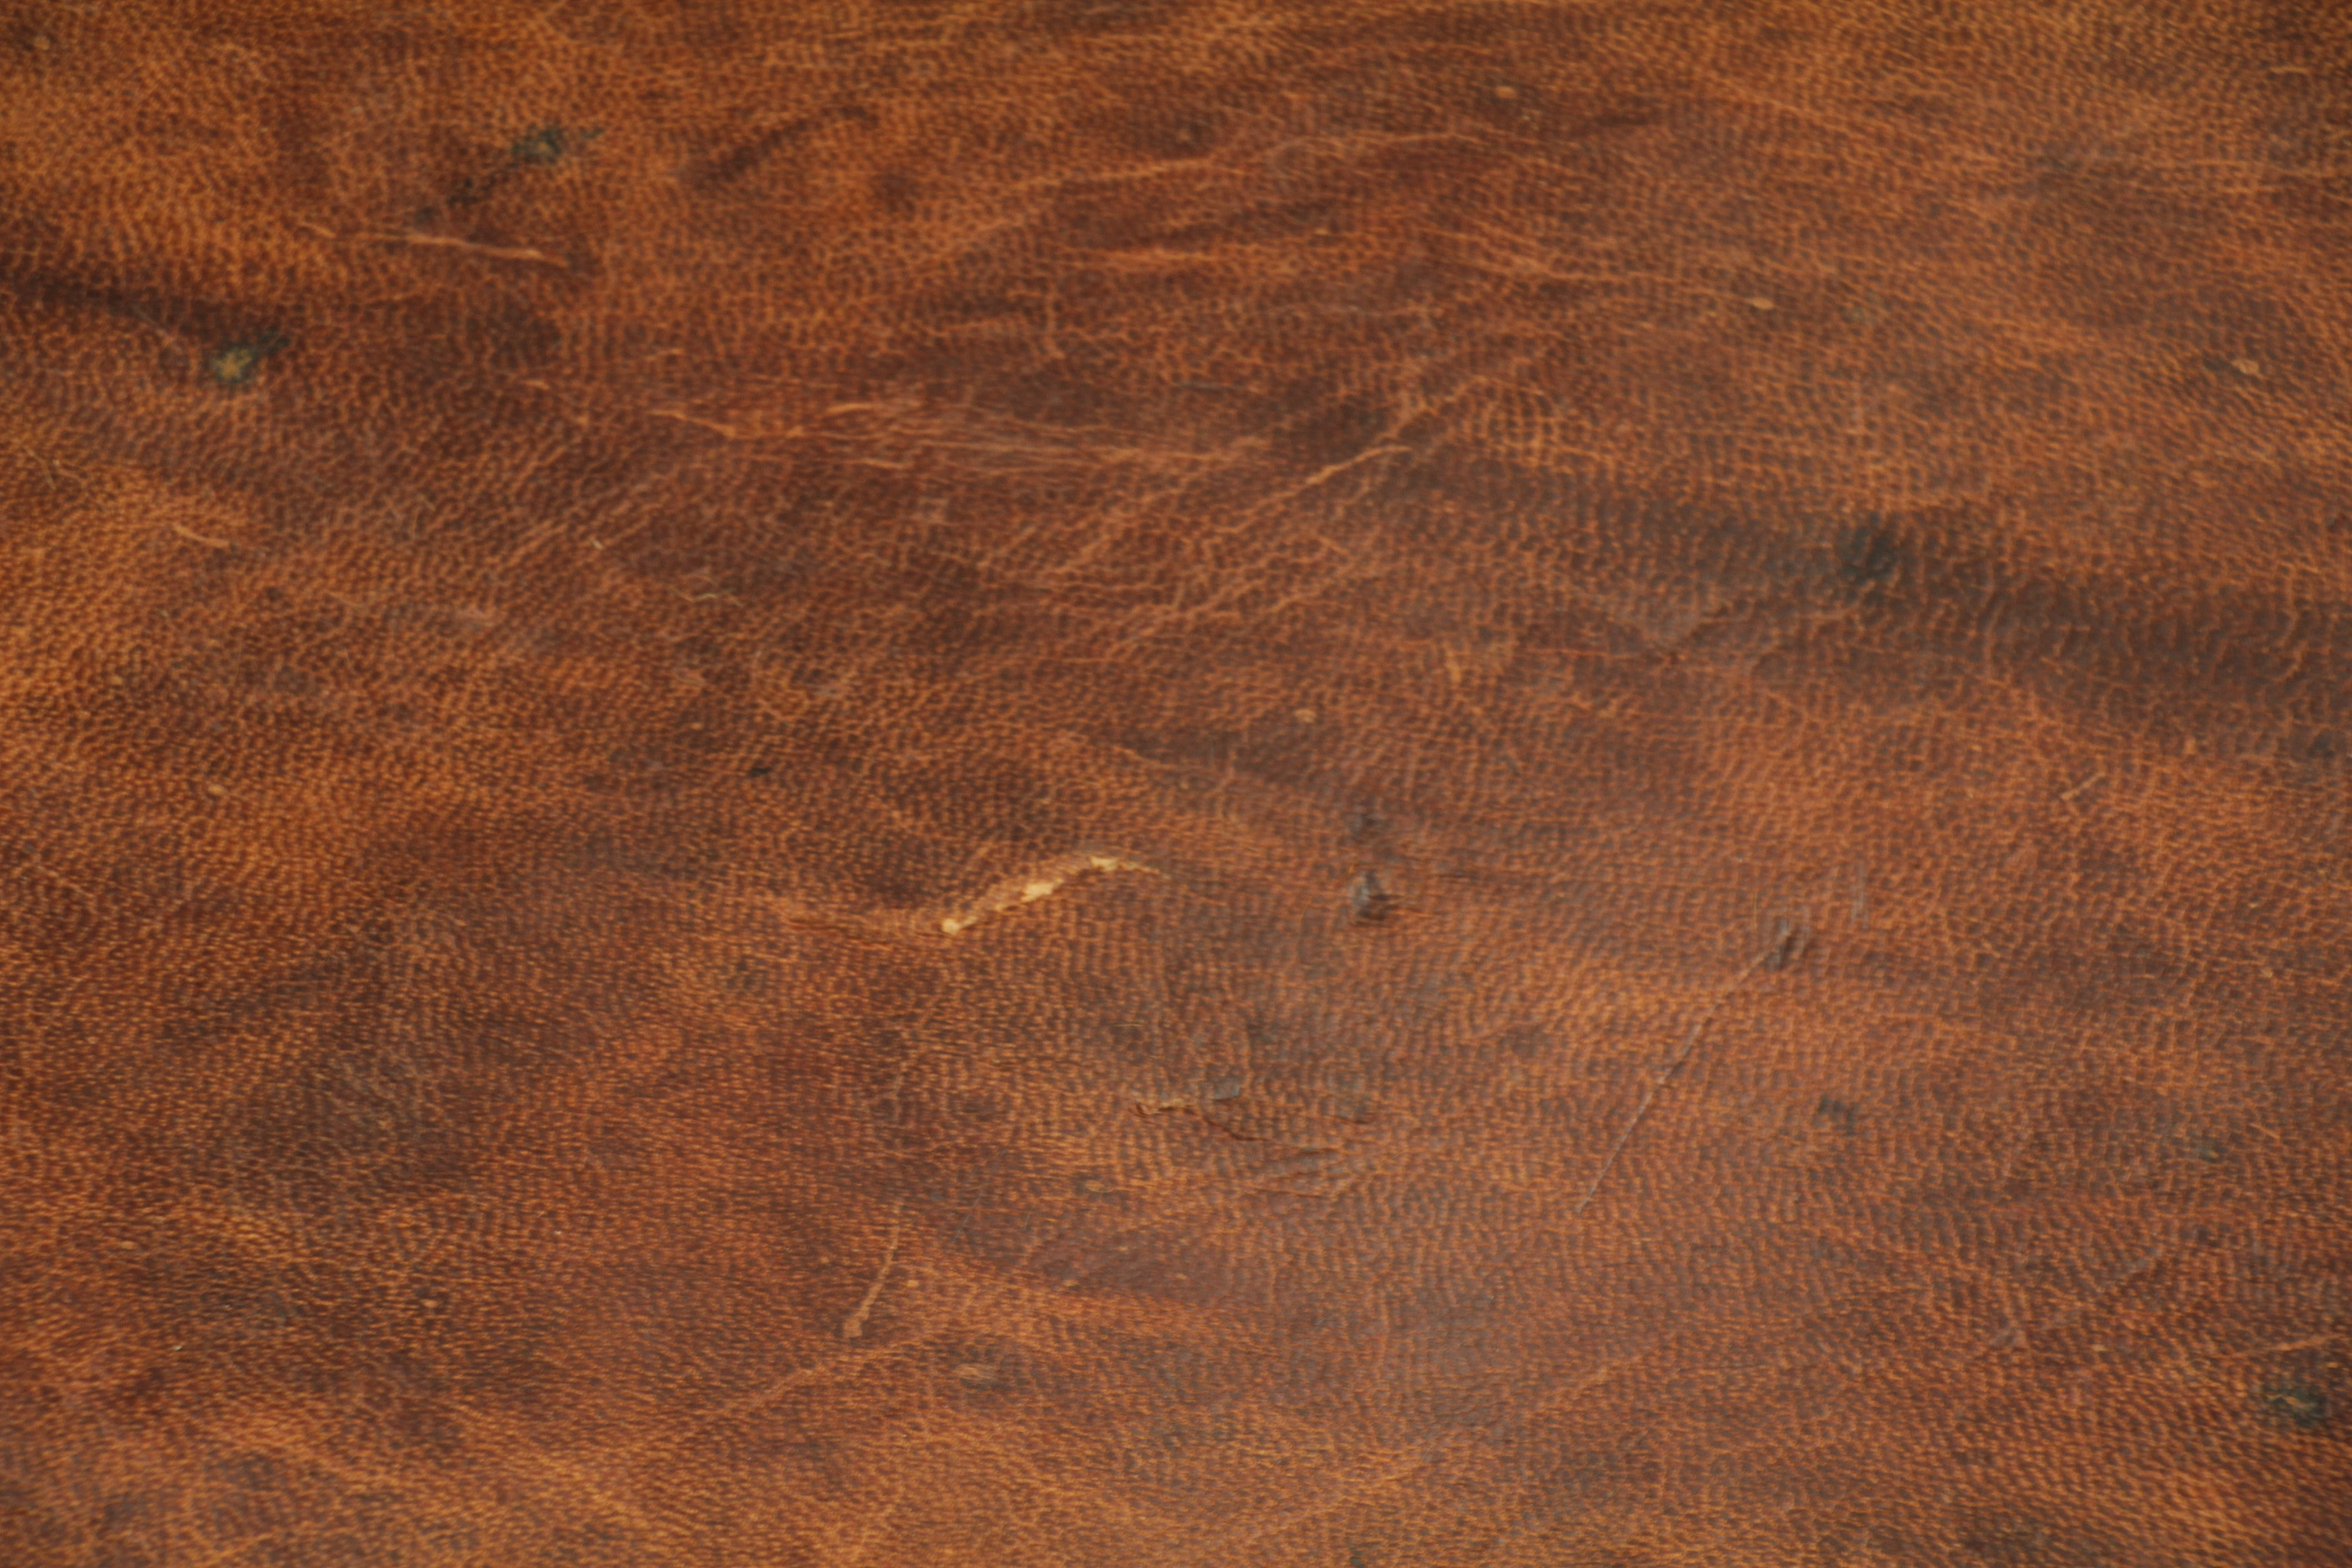 brown leather texture pattern material stock photo old vintage ...